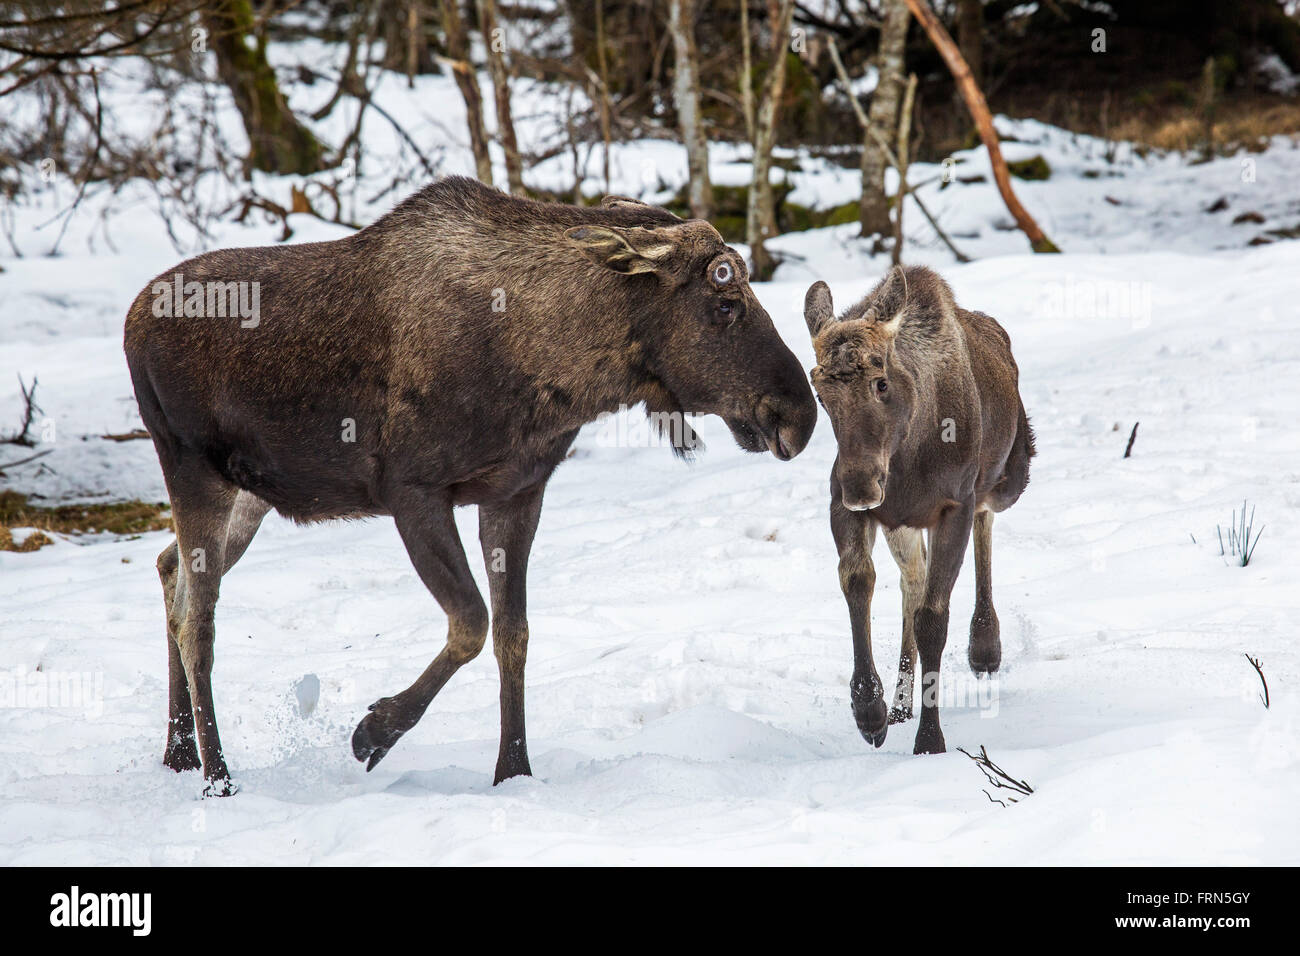 Moose / elk (Alces alces) bull with calf in forest in the snow in winter Stock Photo